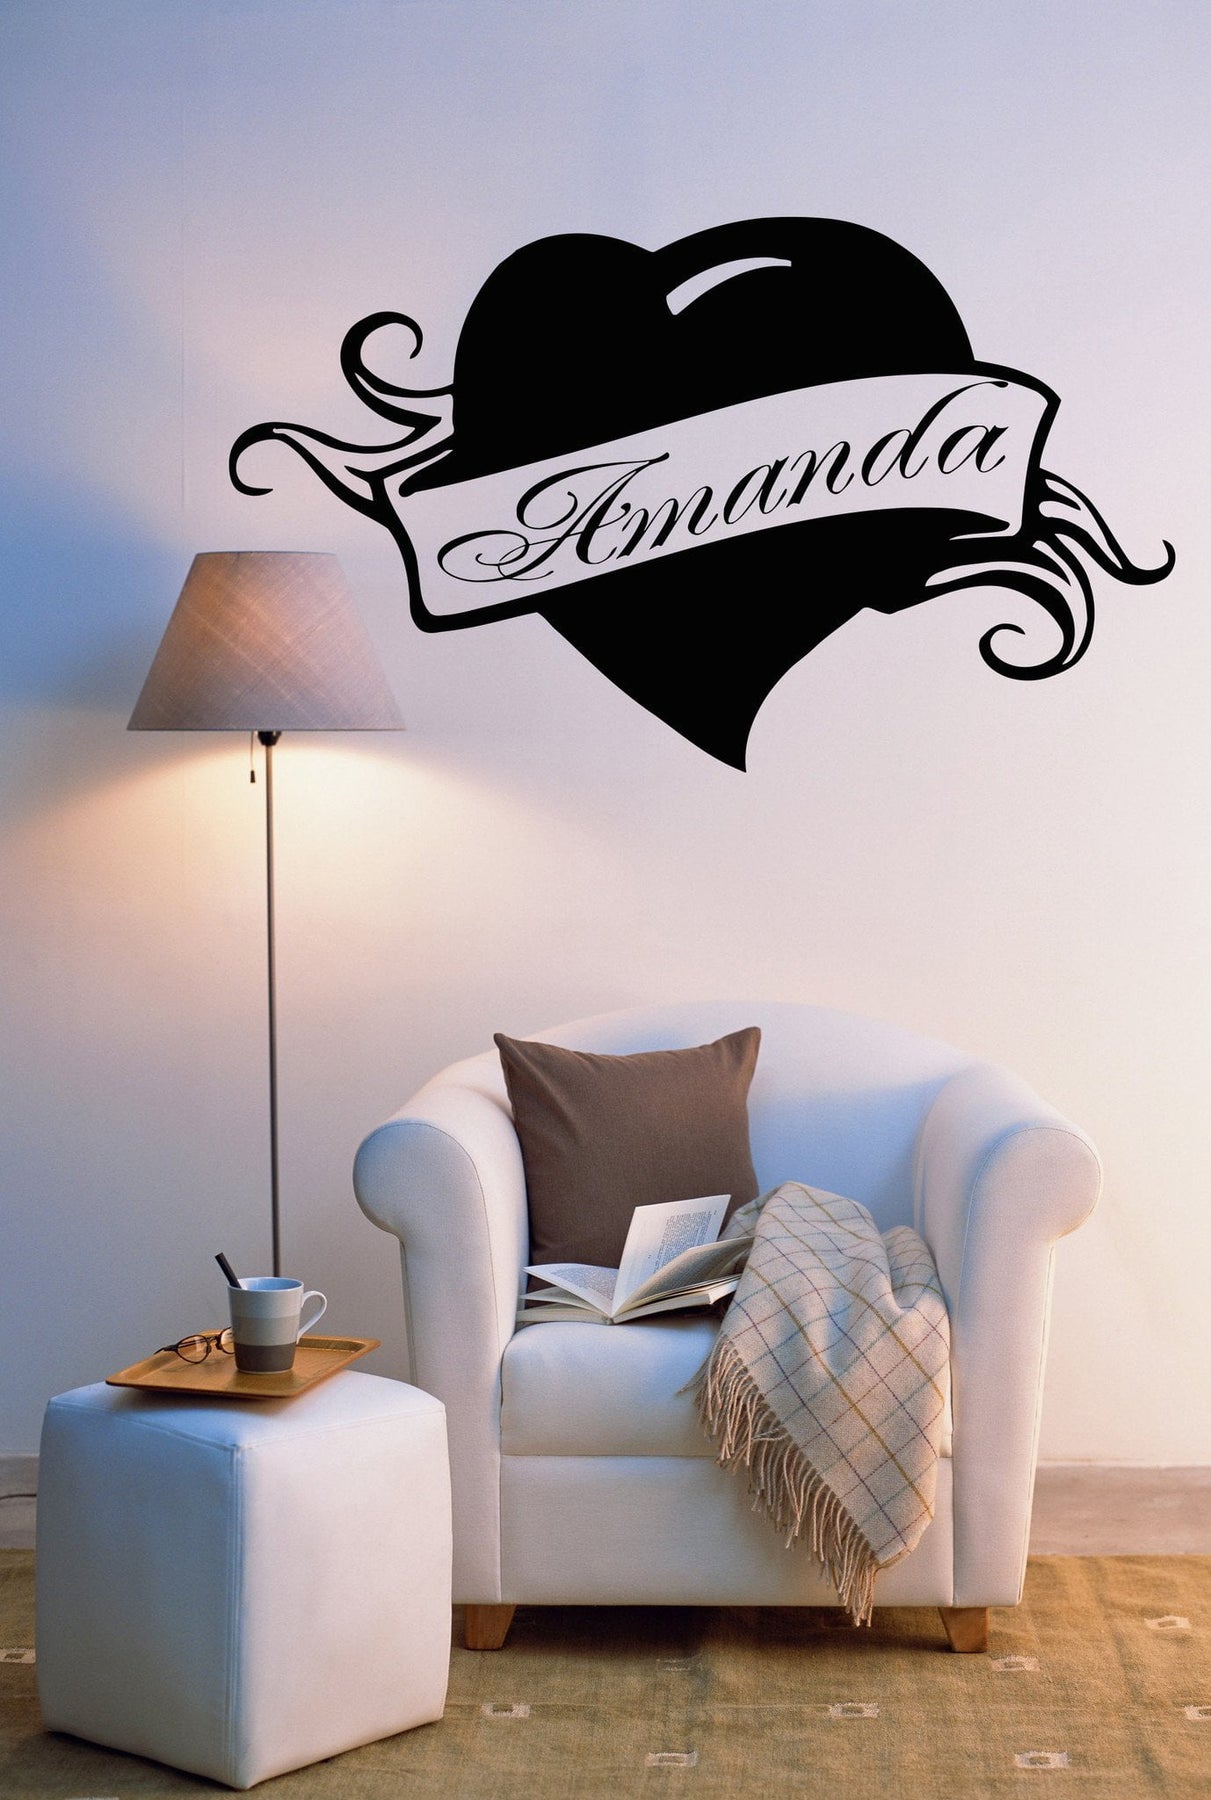 custom wall letter decals